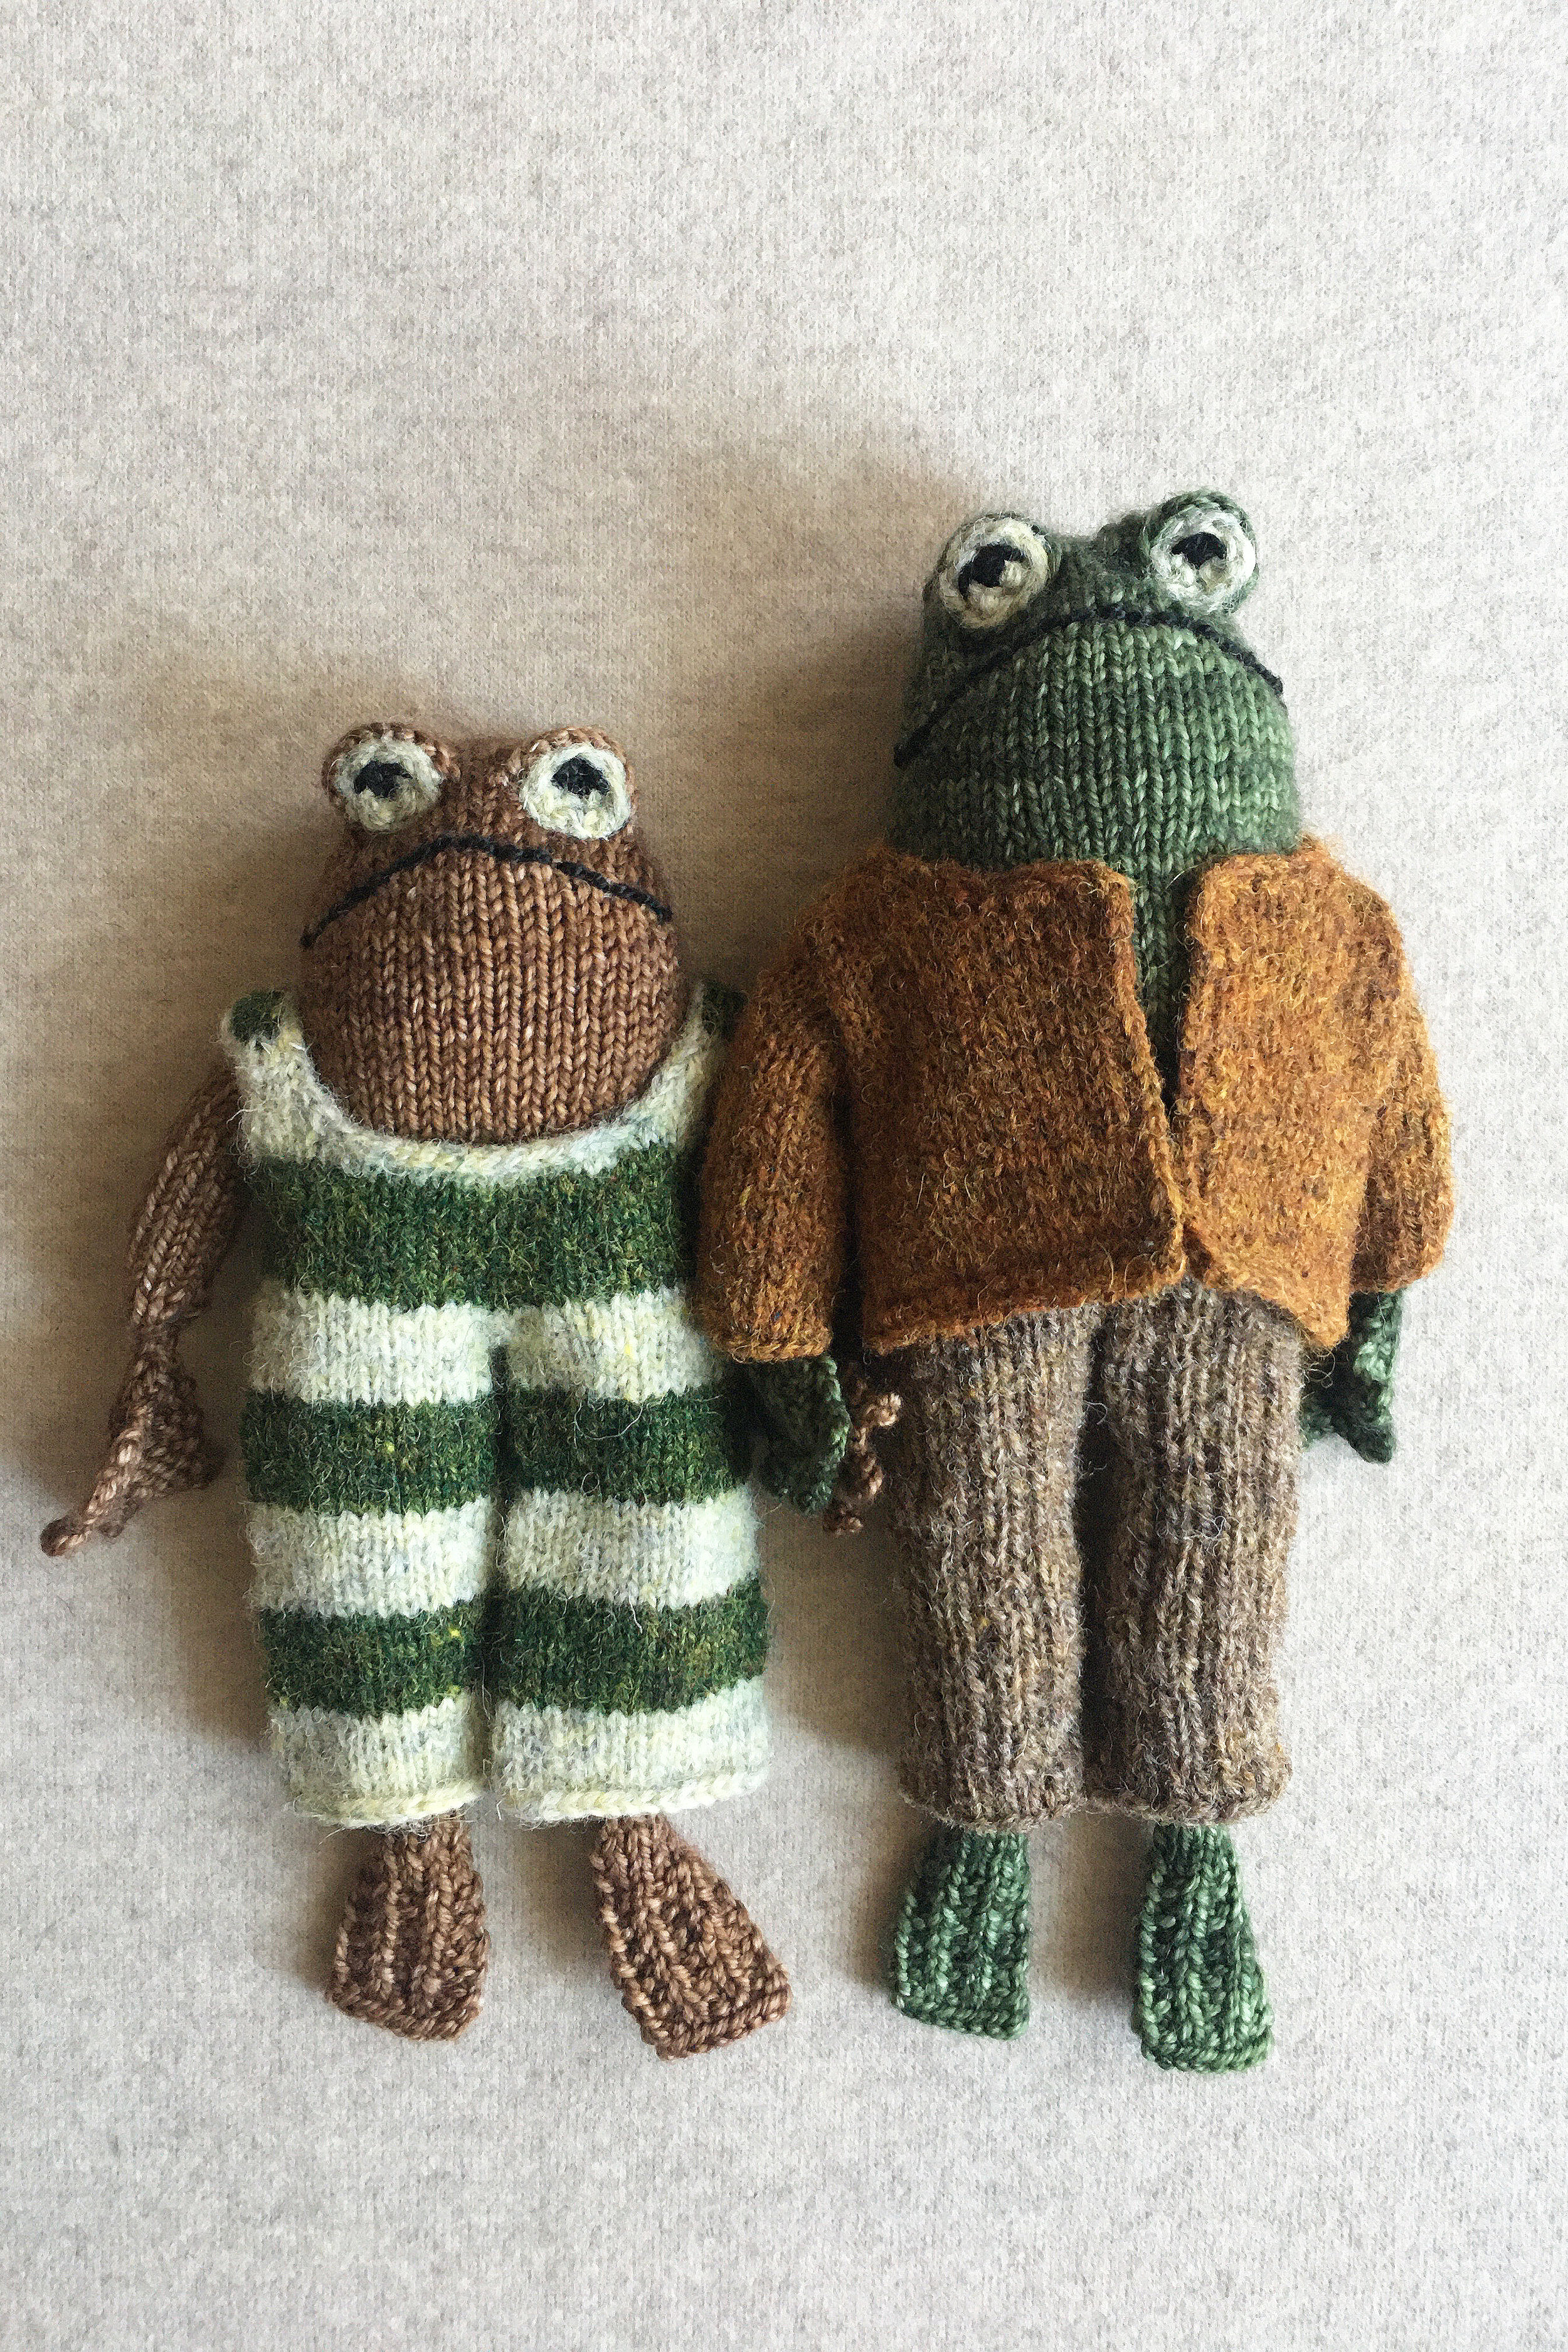 Frog and Toad Clothed.jpg